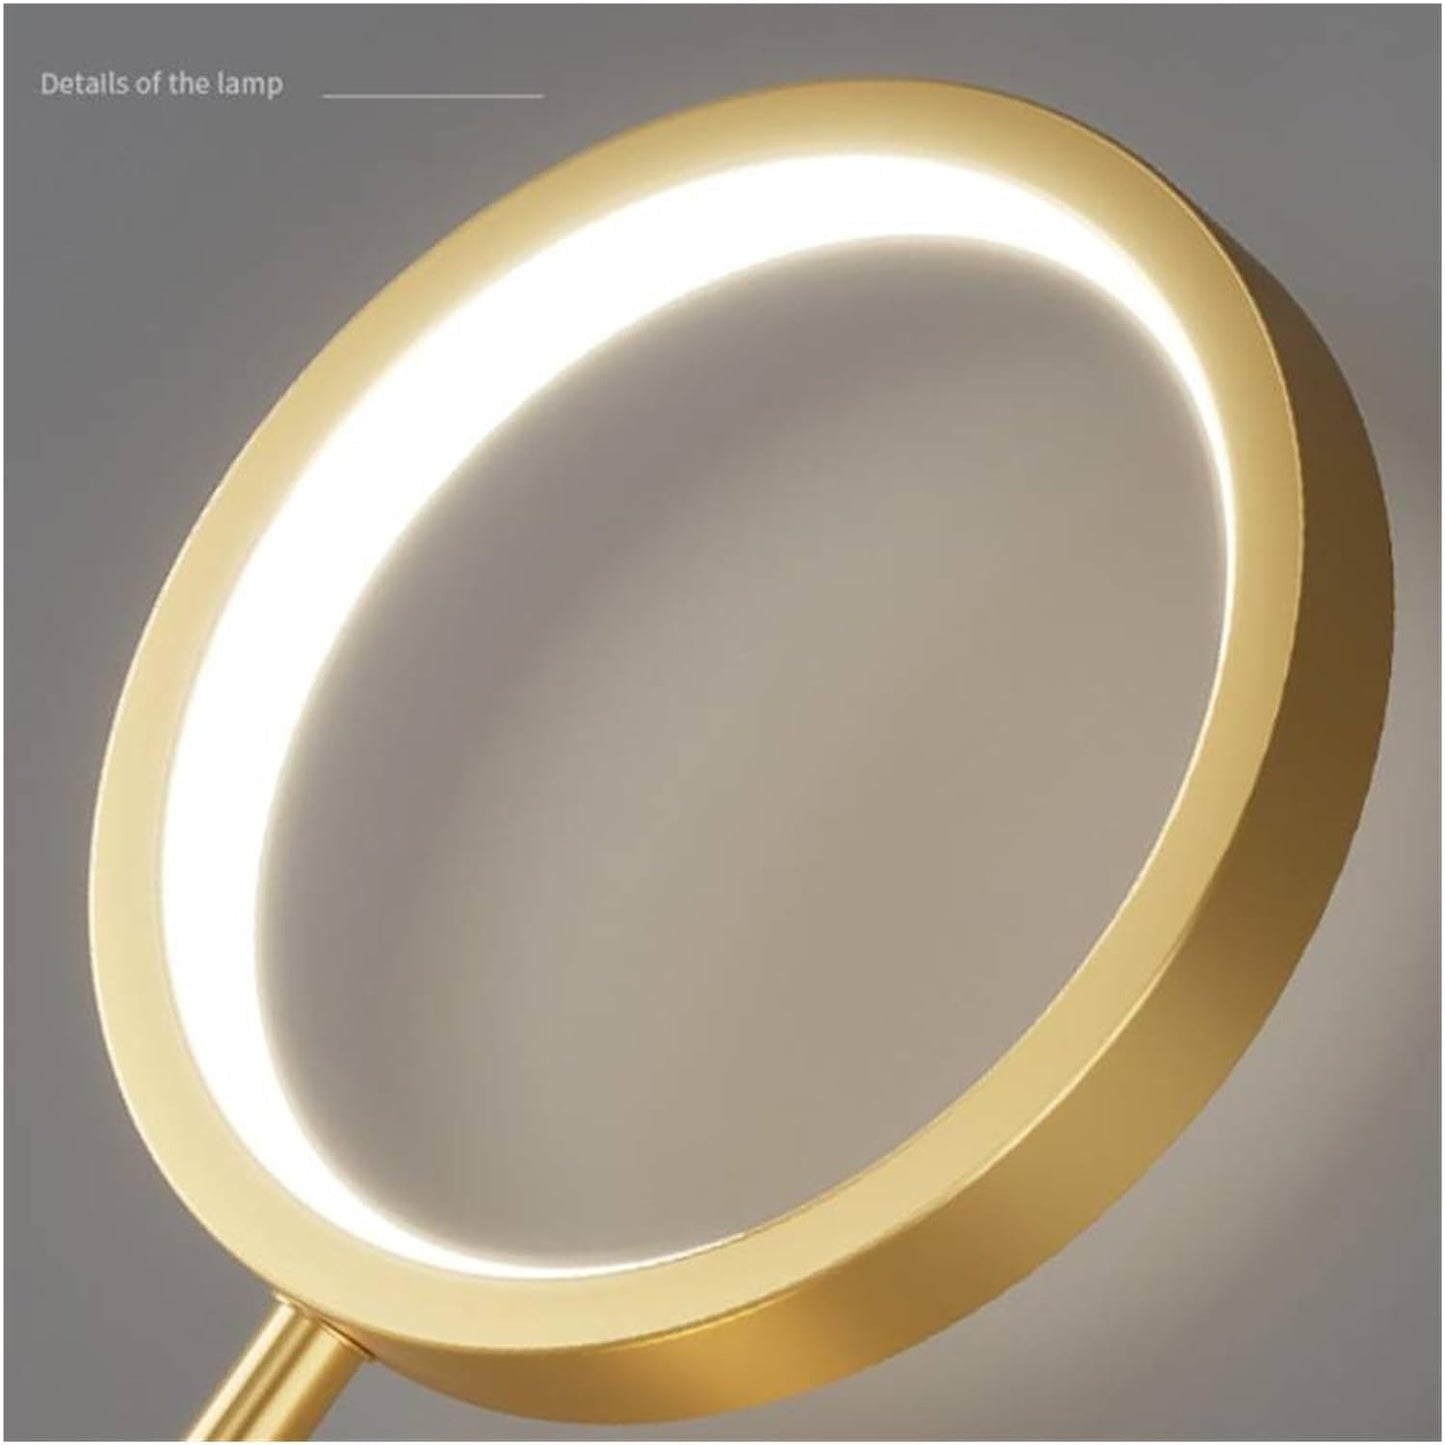 Load image into Gallery viewer, Metal Glass Ball Led Wall Light by Gloss (B5290)
